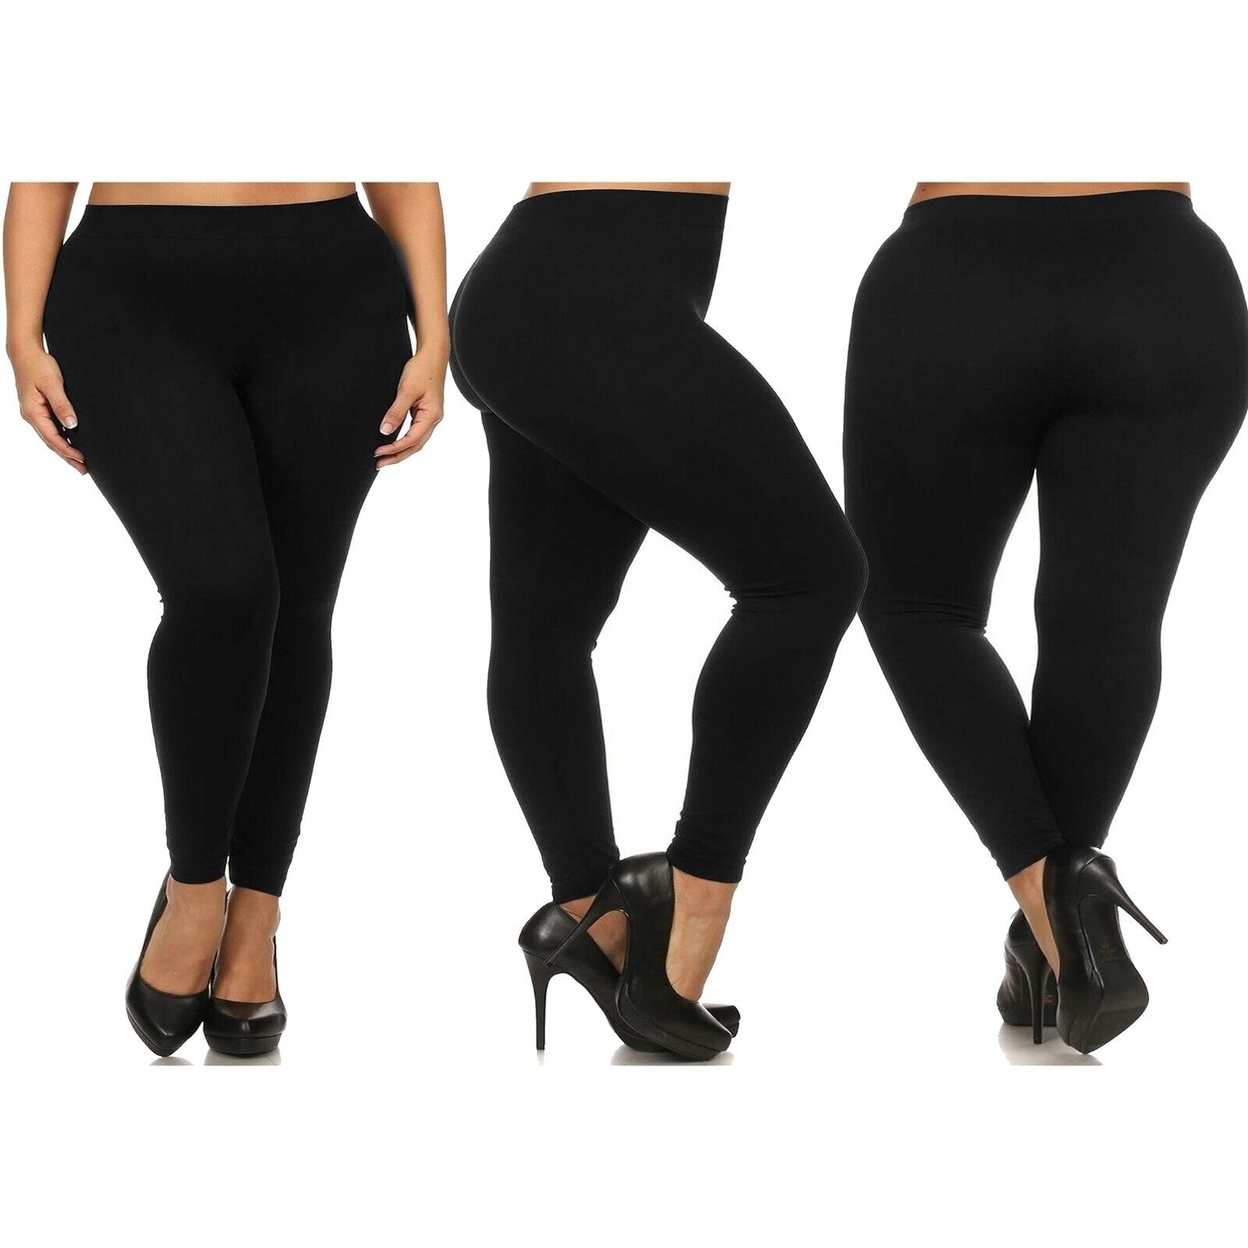 Women's Casual Ultra Soft Smooth High Waisted Athletic Active Yoga Leggings Plus Size Available - Black, 2x